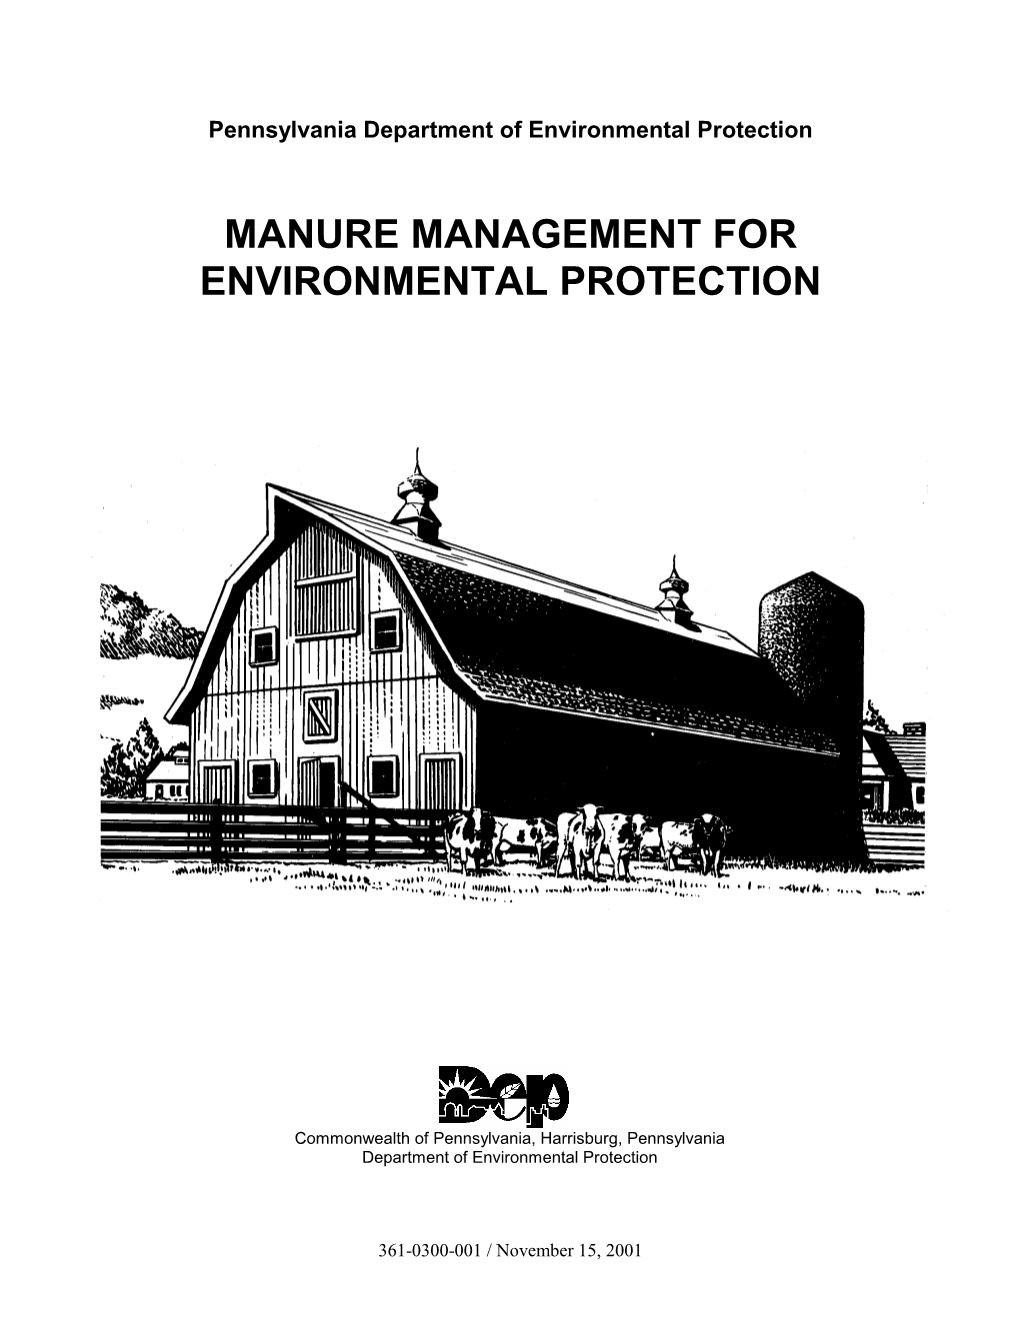 Manure Management for Environmental Protection